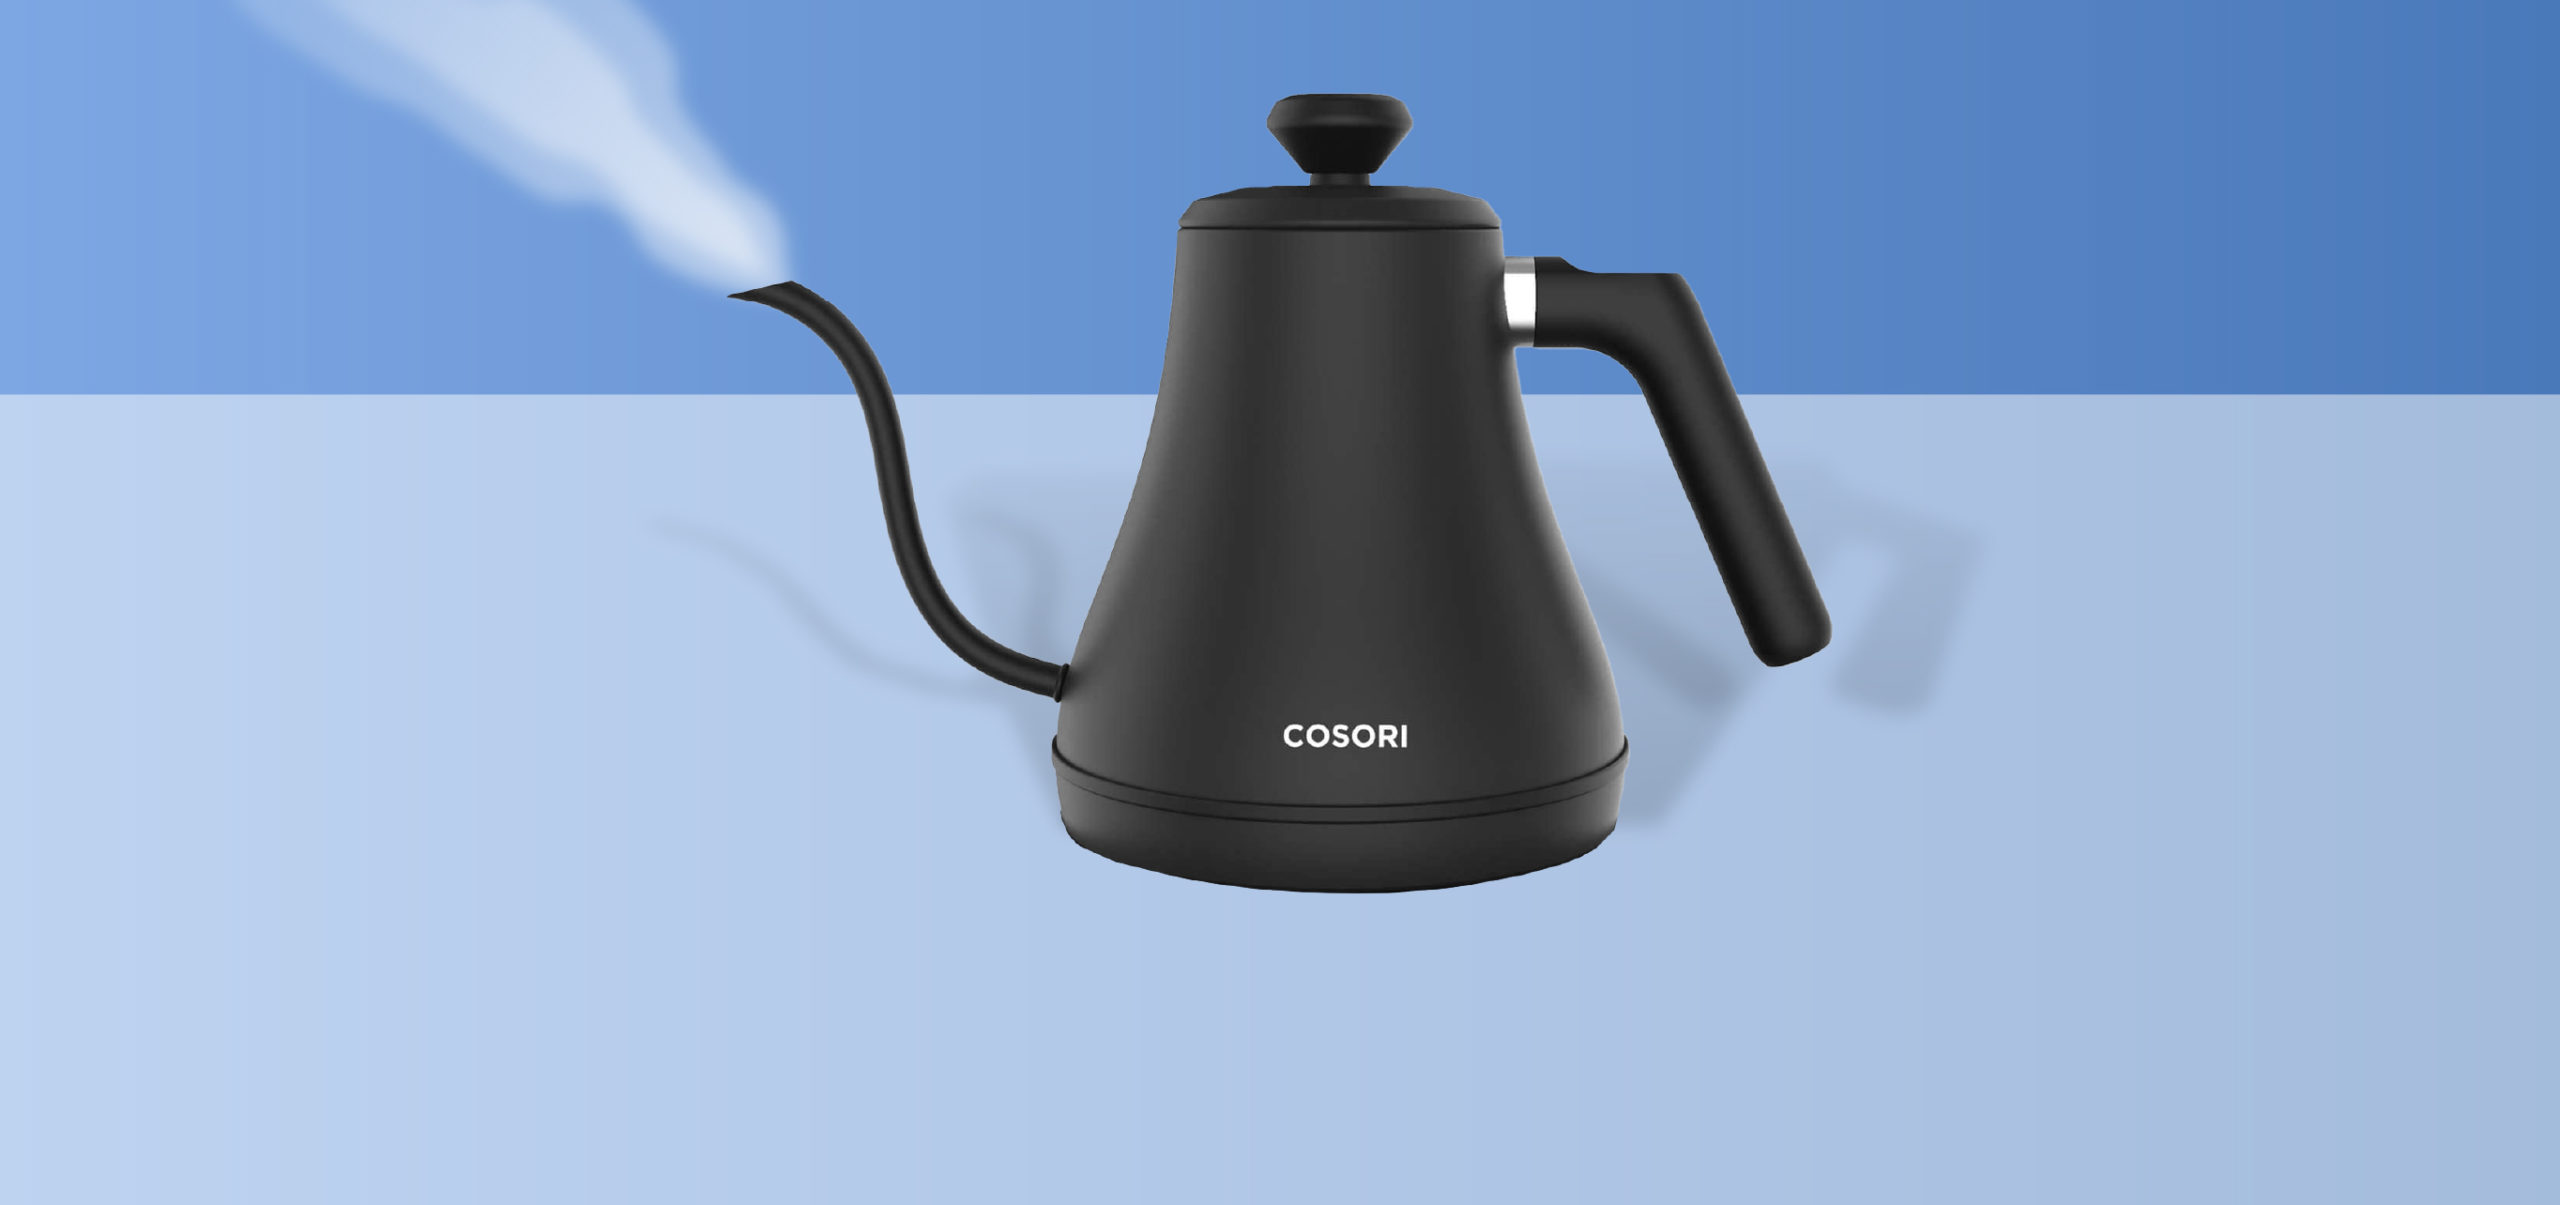 https://www.luckymag.com/wp-content/uploads/2021/12/best-electric-kettles-of-2022@2x-100-scaled.jpg